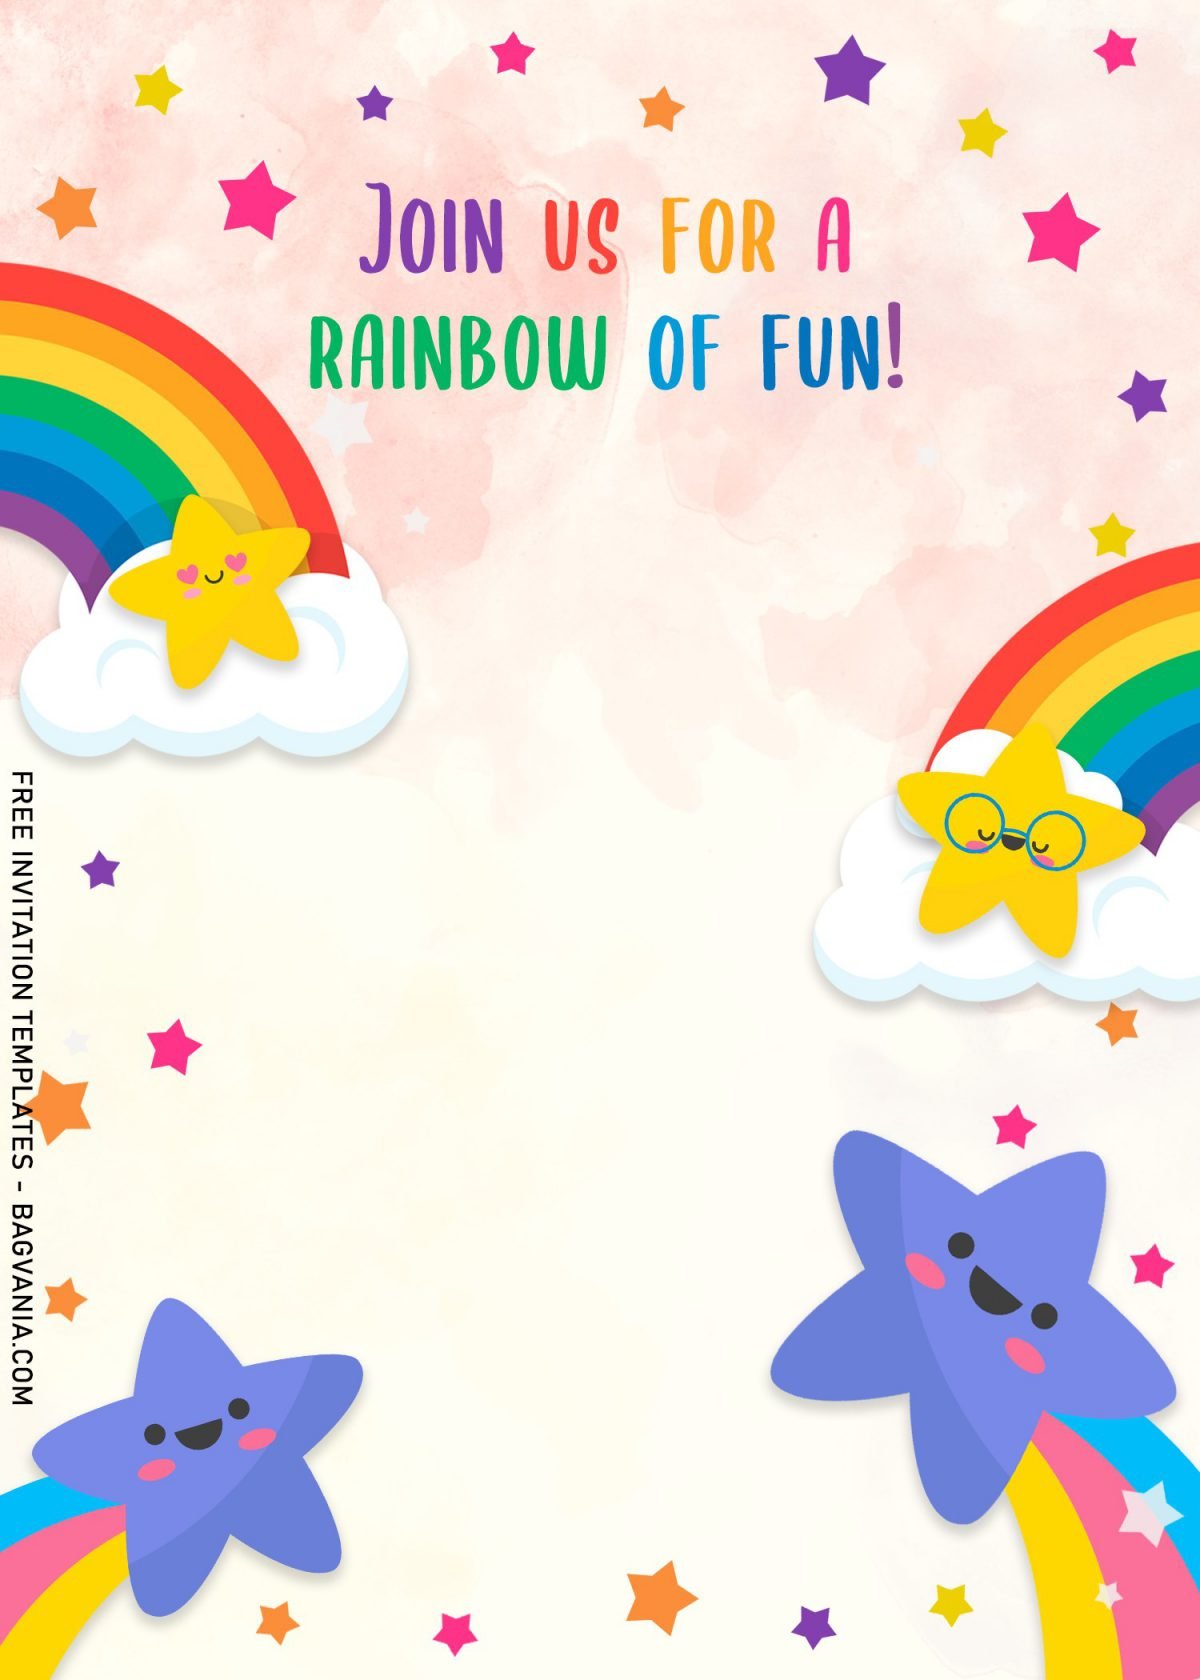 9+ Colorful Rainbow Invitation Card Templates For A Whimsical Birthday Party and has cute pastel colored rainbows